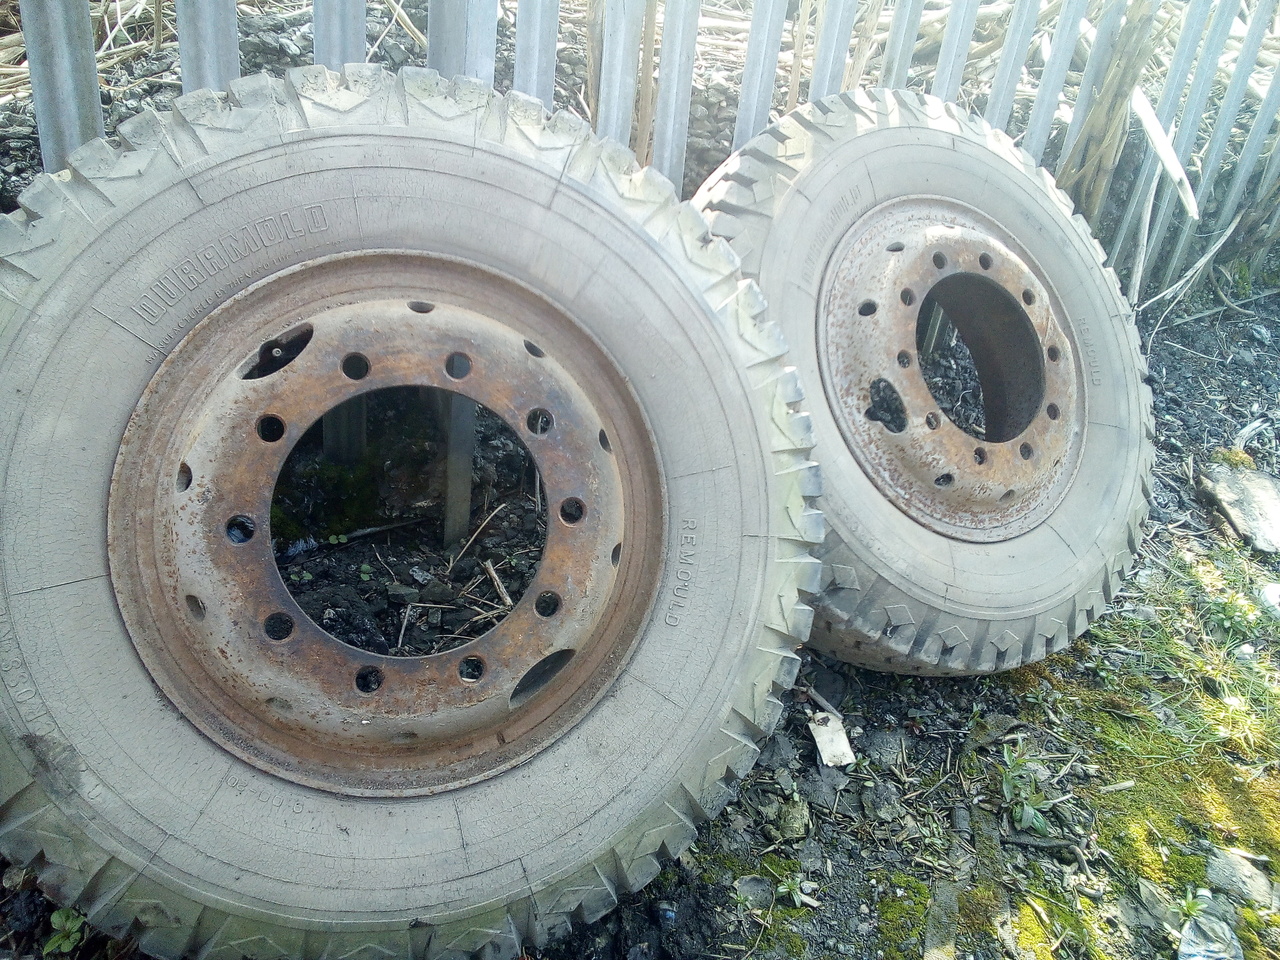 A pair of the truck's rear wheels, leaned up against the fence.